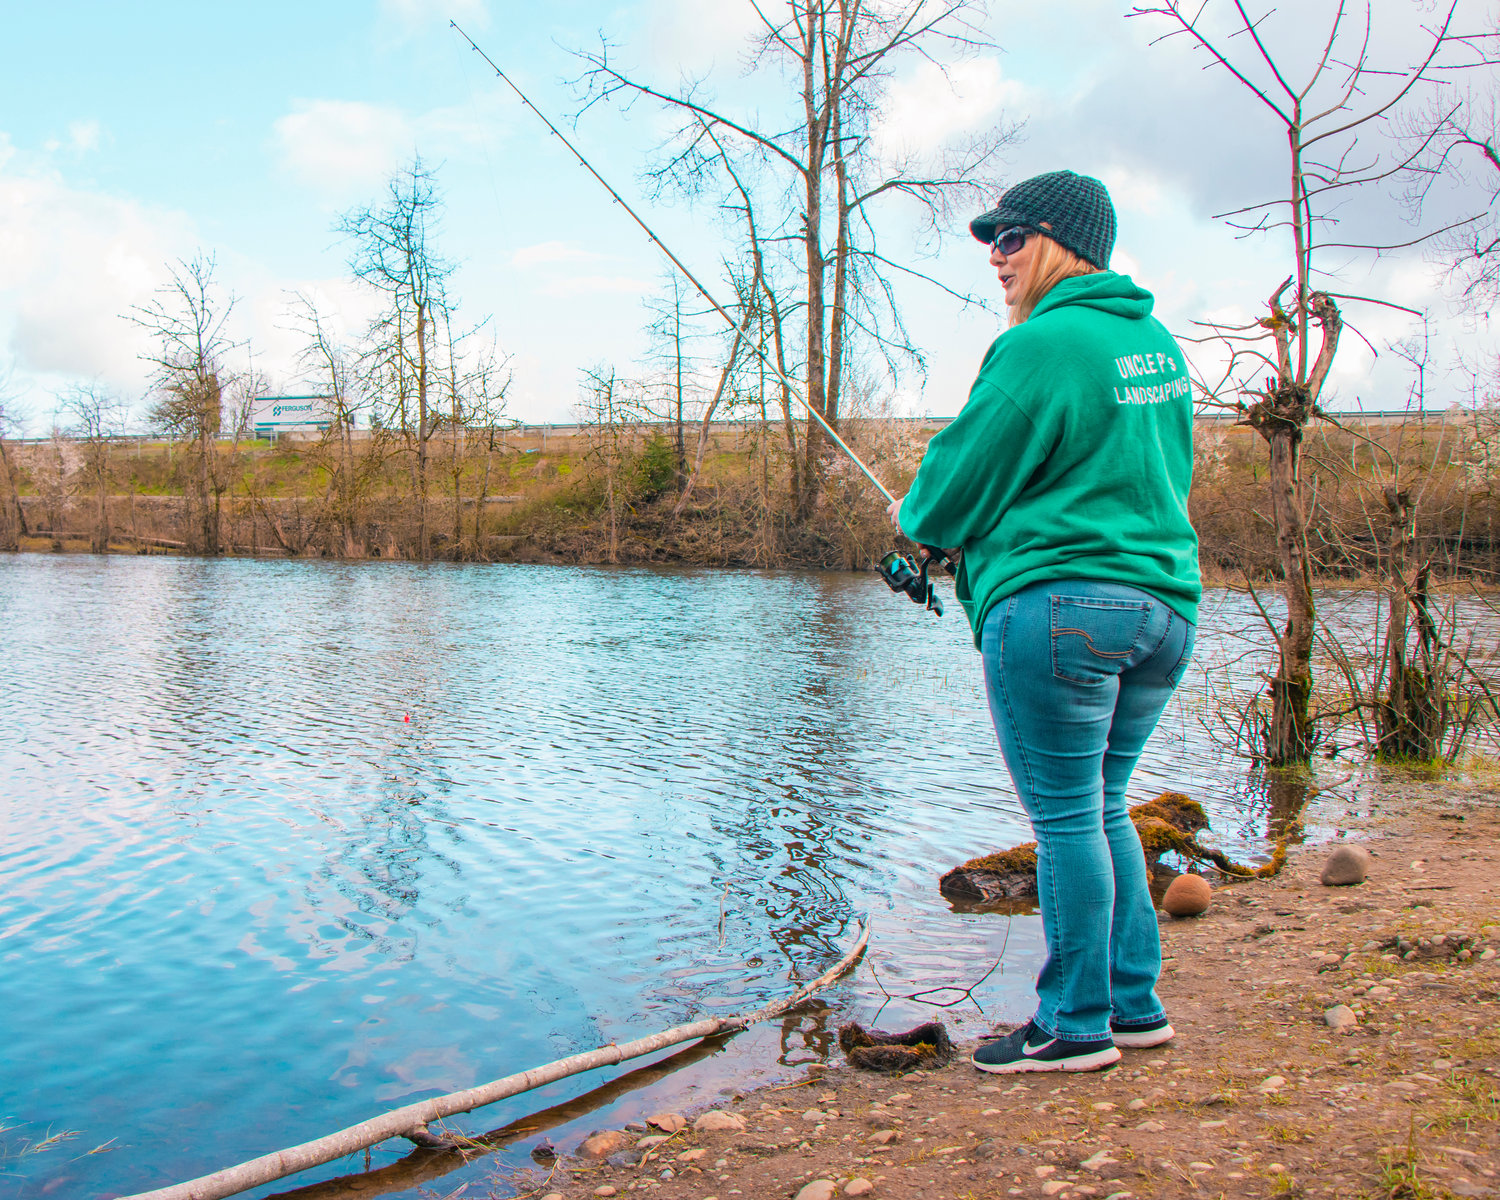 Gina Brown-Adametz celebrates her 51st birthday fishing along the bank of the Borst Park pond Monday morning in Centralia.